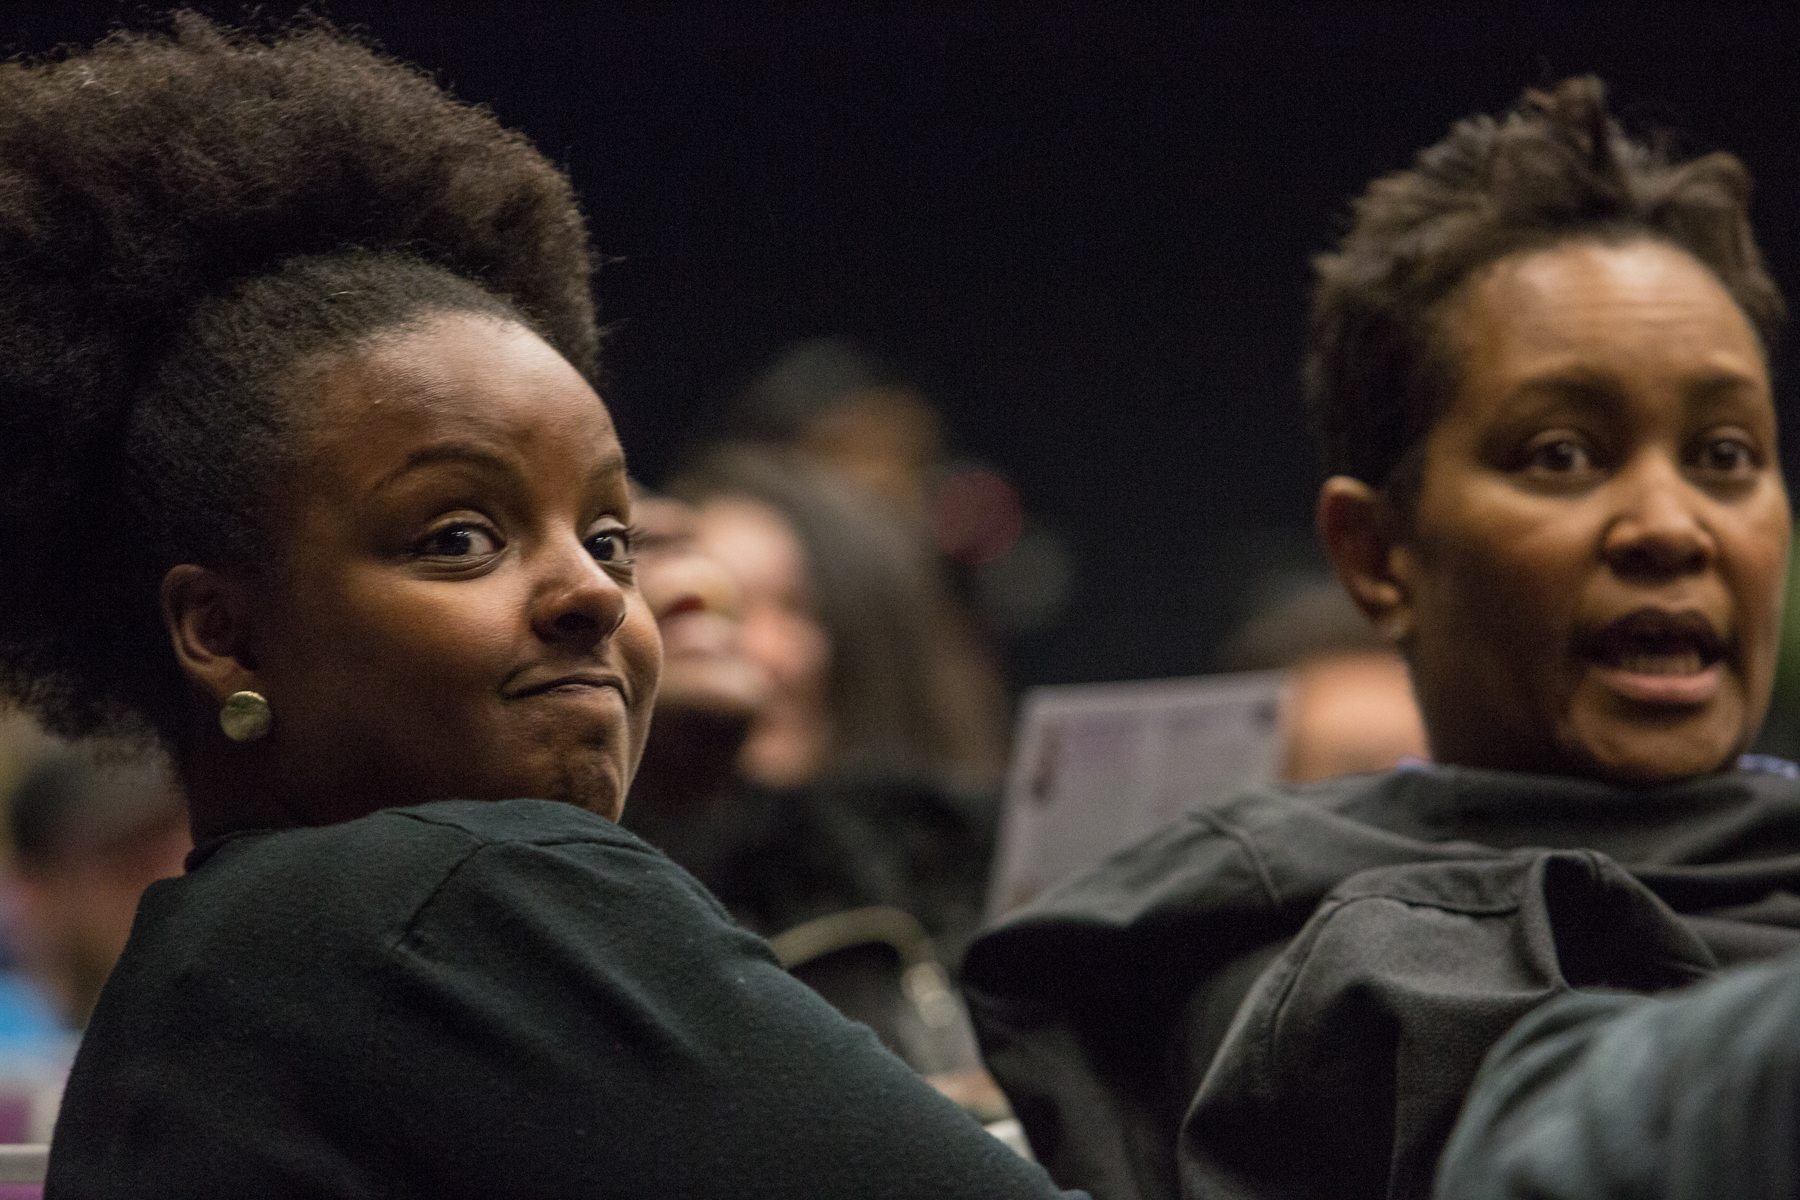  Sherri Bradford (left) and Deyadra Blye (right), both counselors at Santa Monica College, listen to the speakers at the 'Inclusion in TV: A Q&A with Marvel and DC TV writers' held at Santa Monica College, Santa Monica, CA on Wednesday February 28 20